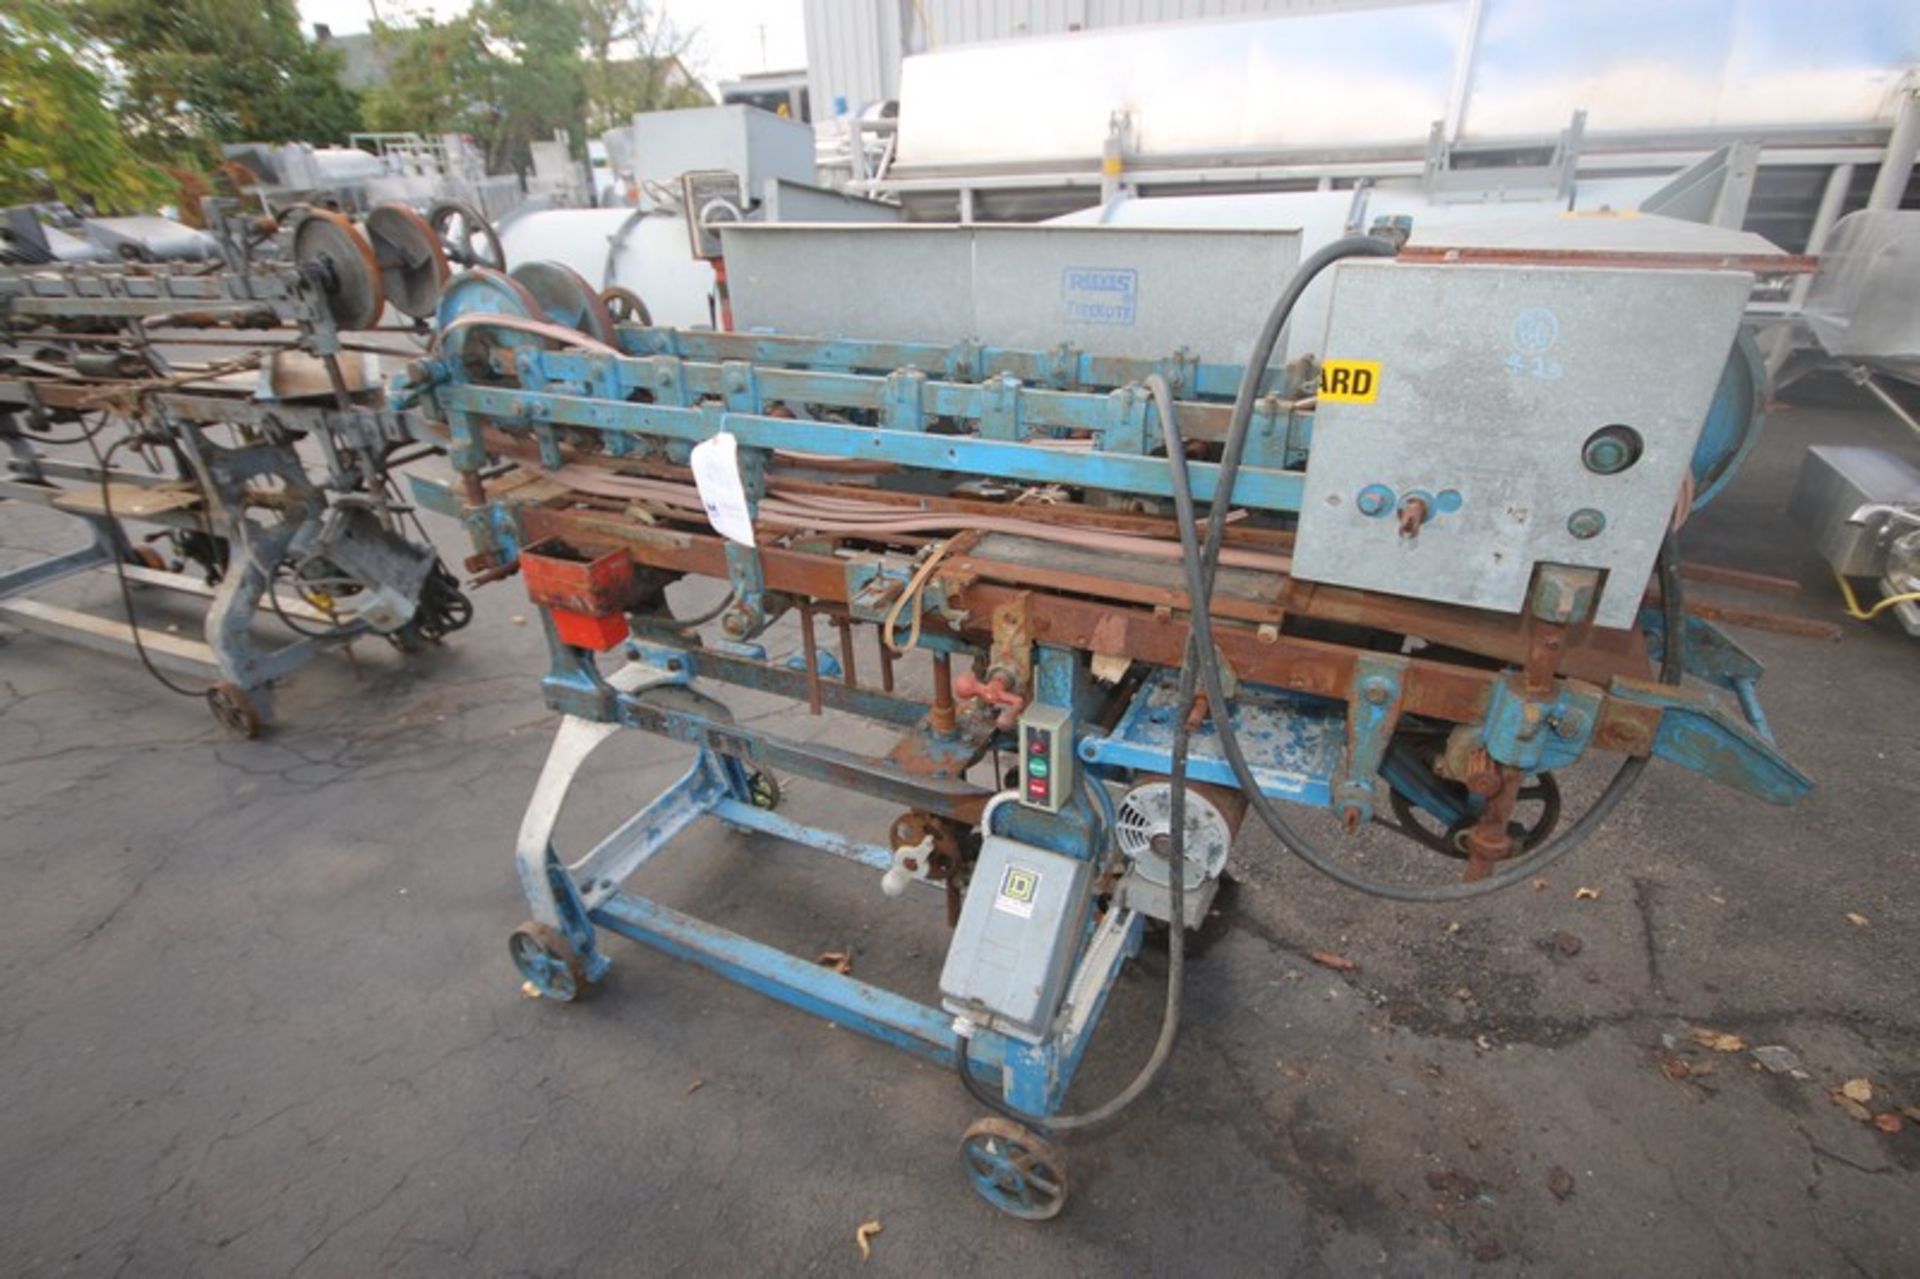 Burt Roll Through Labeling Machine, S/N 13465 - Possibly Missing Parts (INV#73223) (LOCATED AT MDG - Image 2 of 5